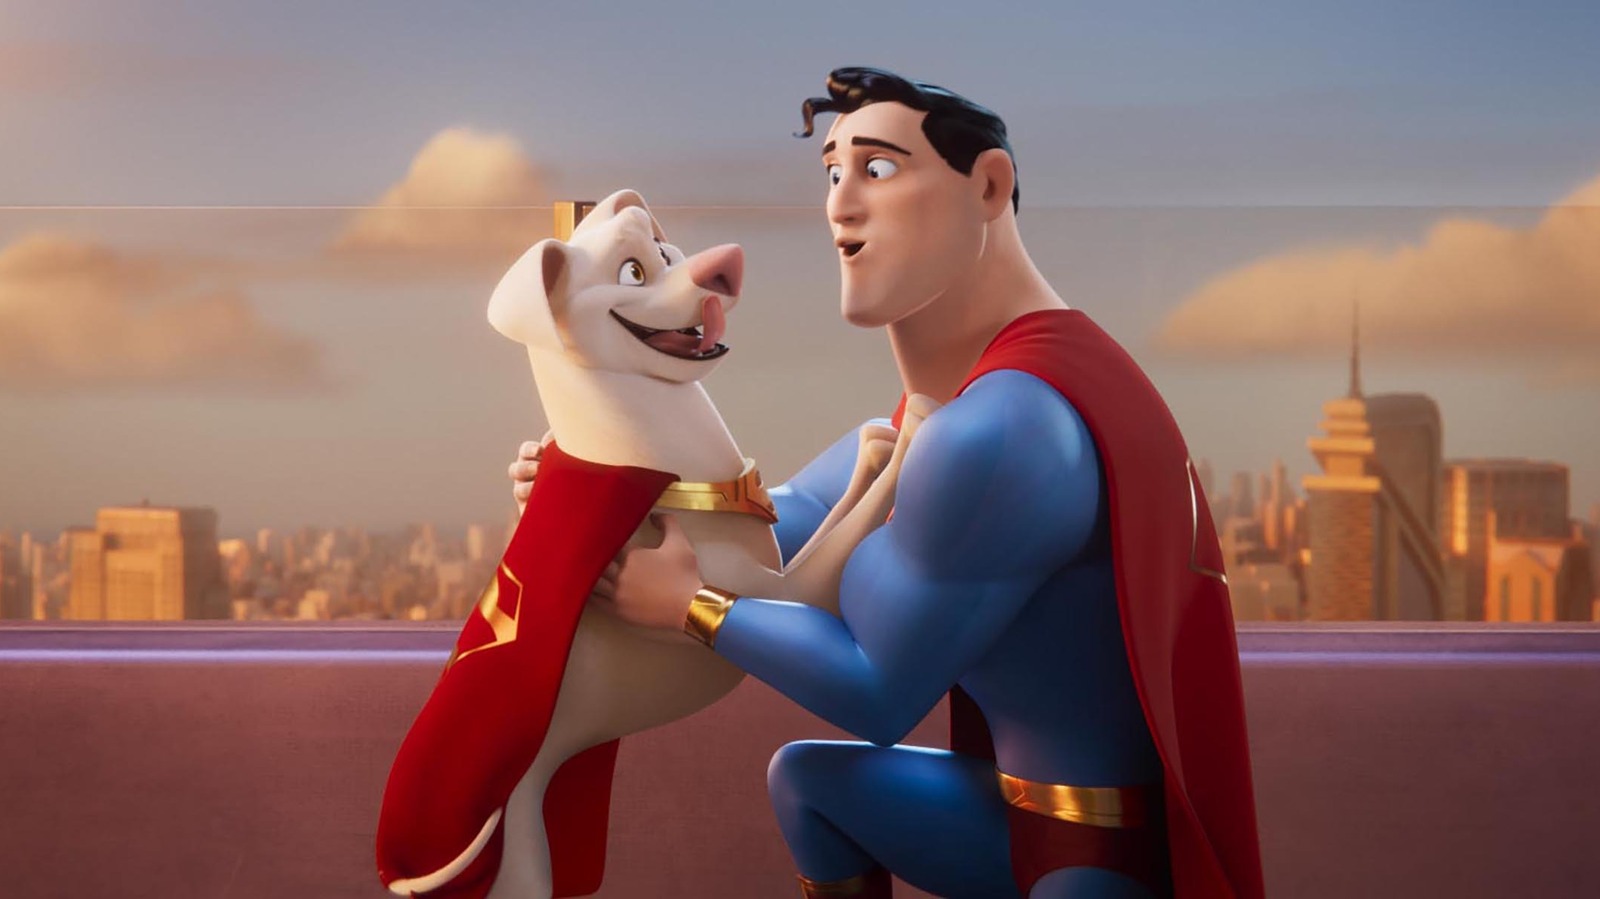 DC League Of Super-Pets Director Jared Stern Built The Story Around Superman’s Best Friend [Interview]